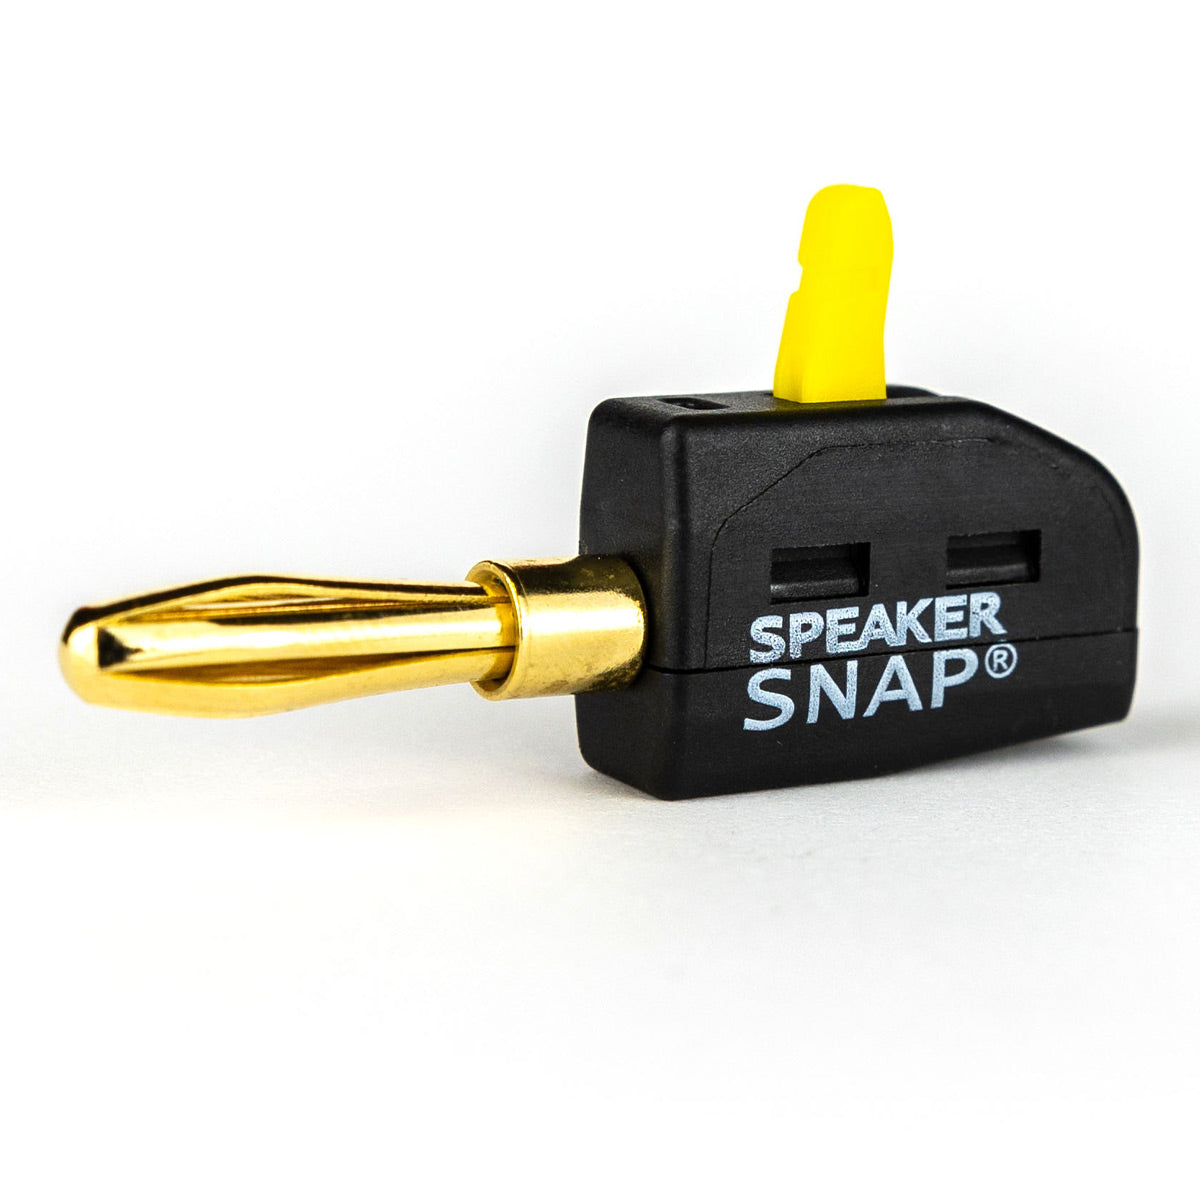 Speaker Snap 8 Count of Fast & Secure Banana Plugs, Gold Plated, 12-24 AWG, for Home Theaters, Speaker Wire, Wall Plates, and Receivers